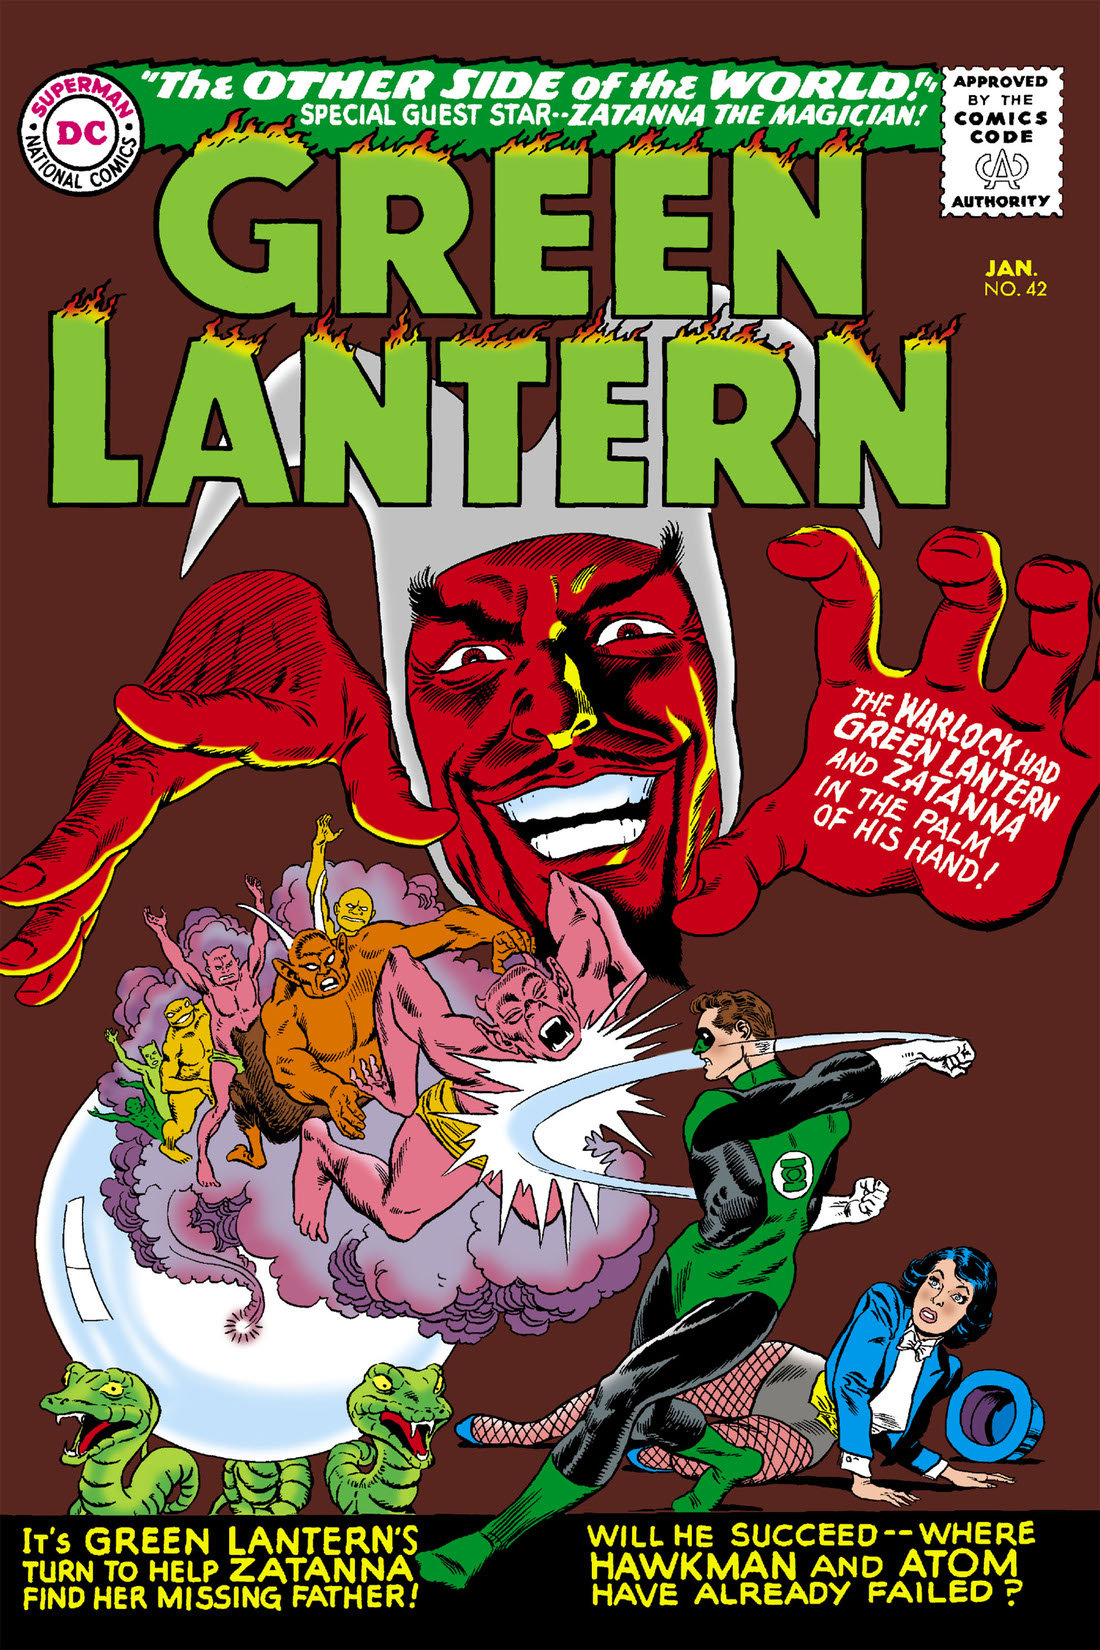 Green Lantern (1960-) #42 preview images